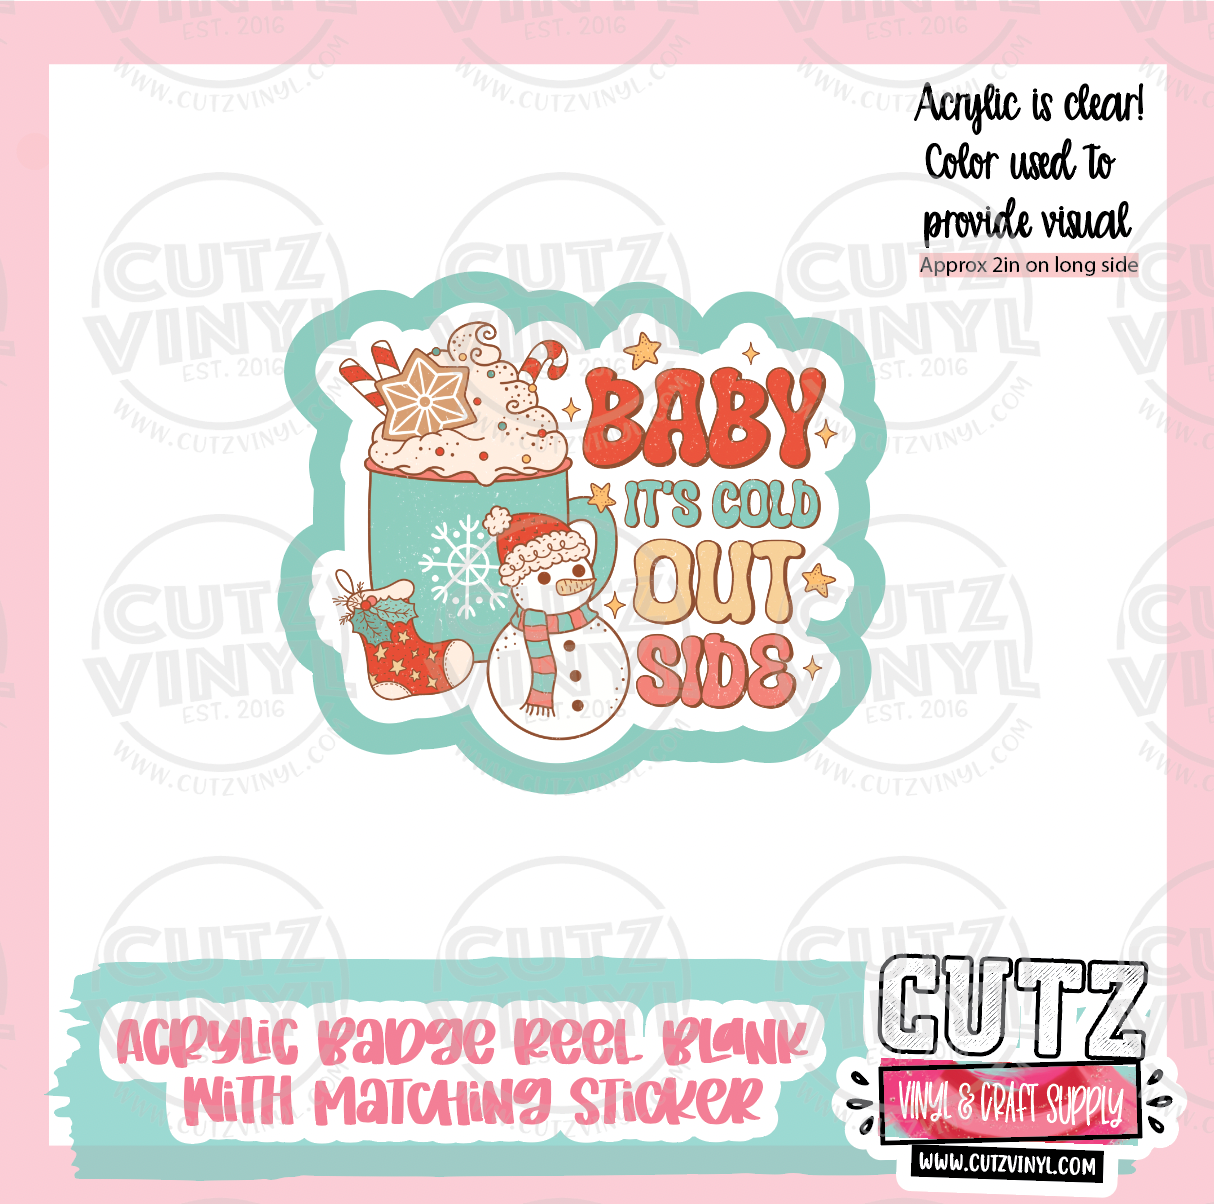 Baby its cold - Acrylic Badge Reel Blank and Matching Sticker